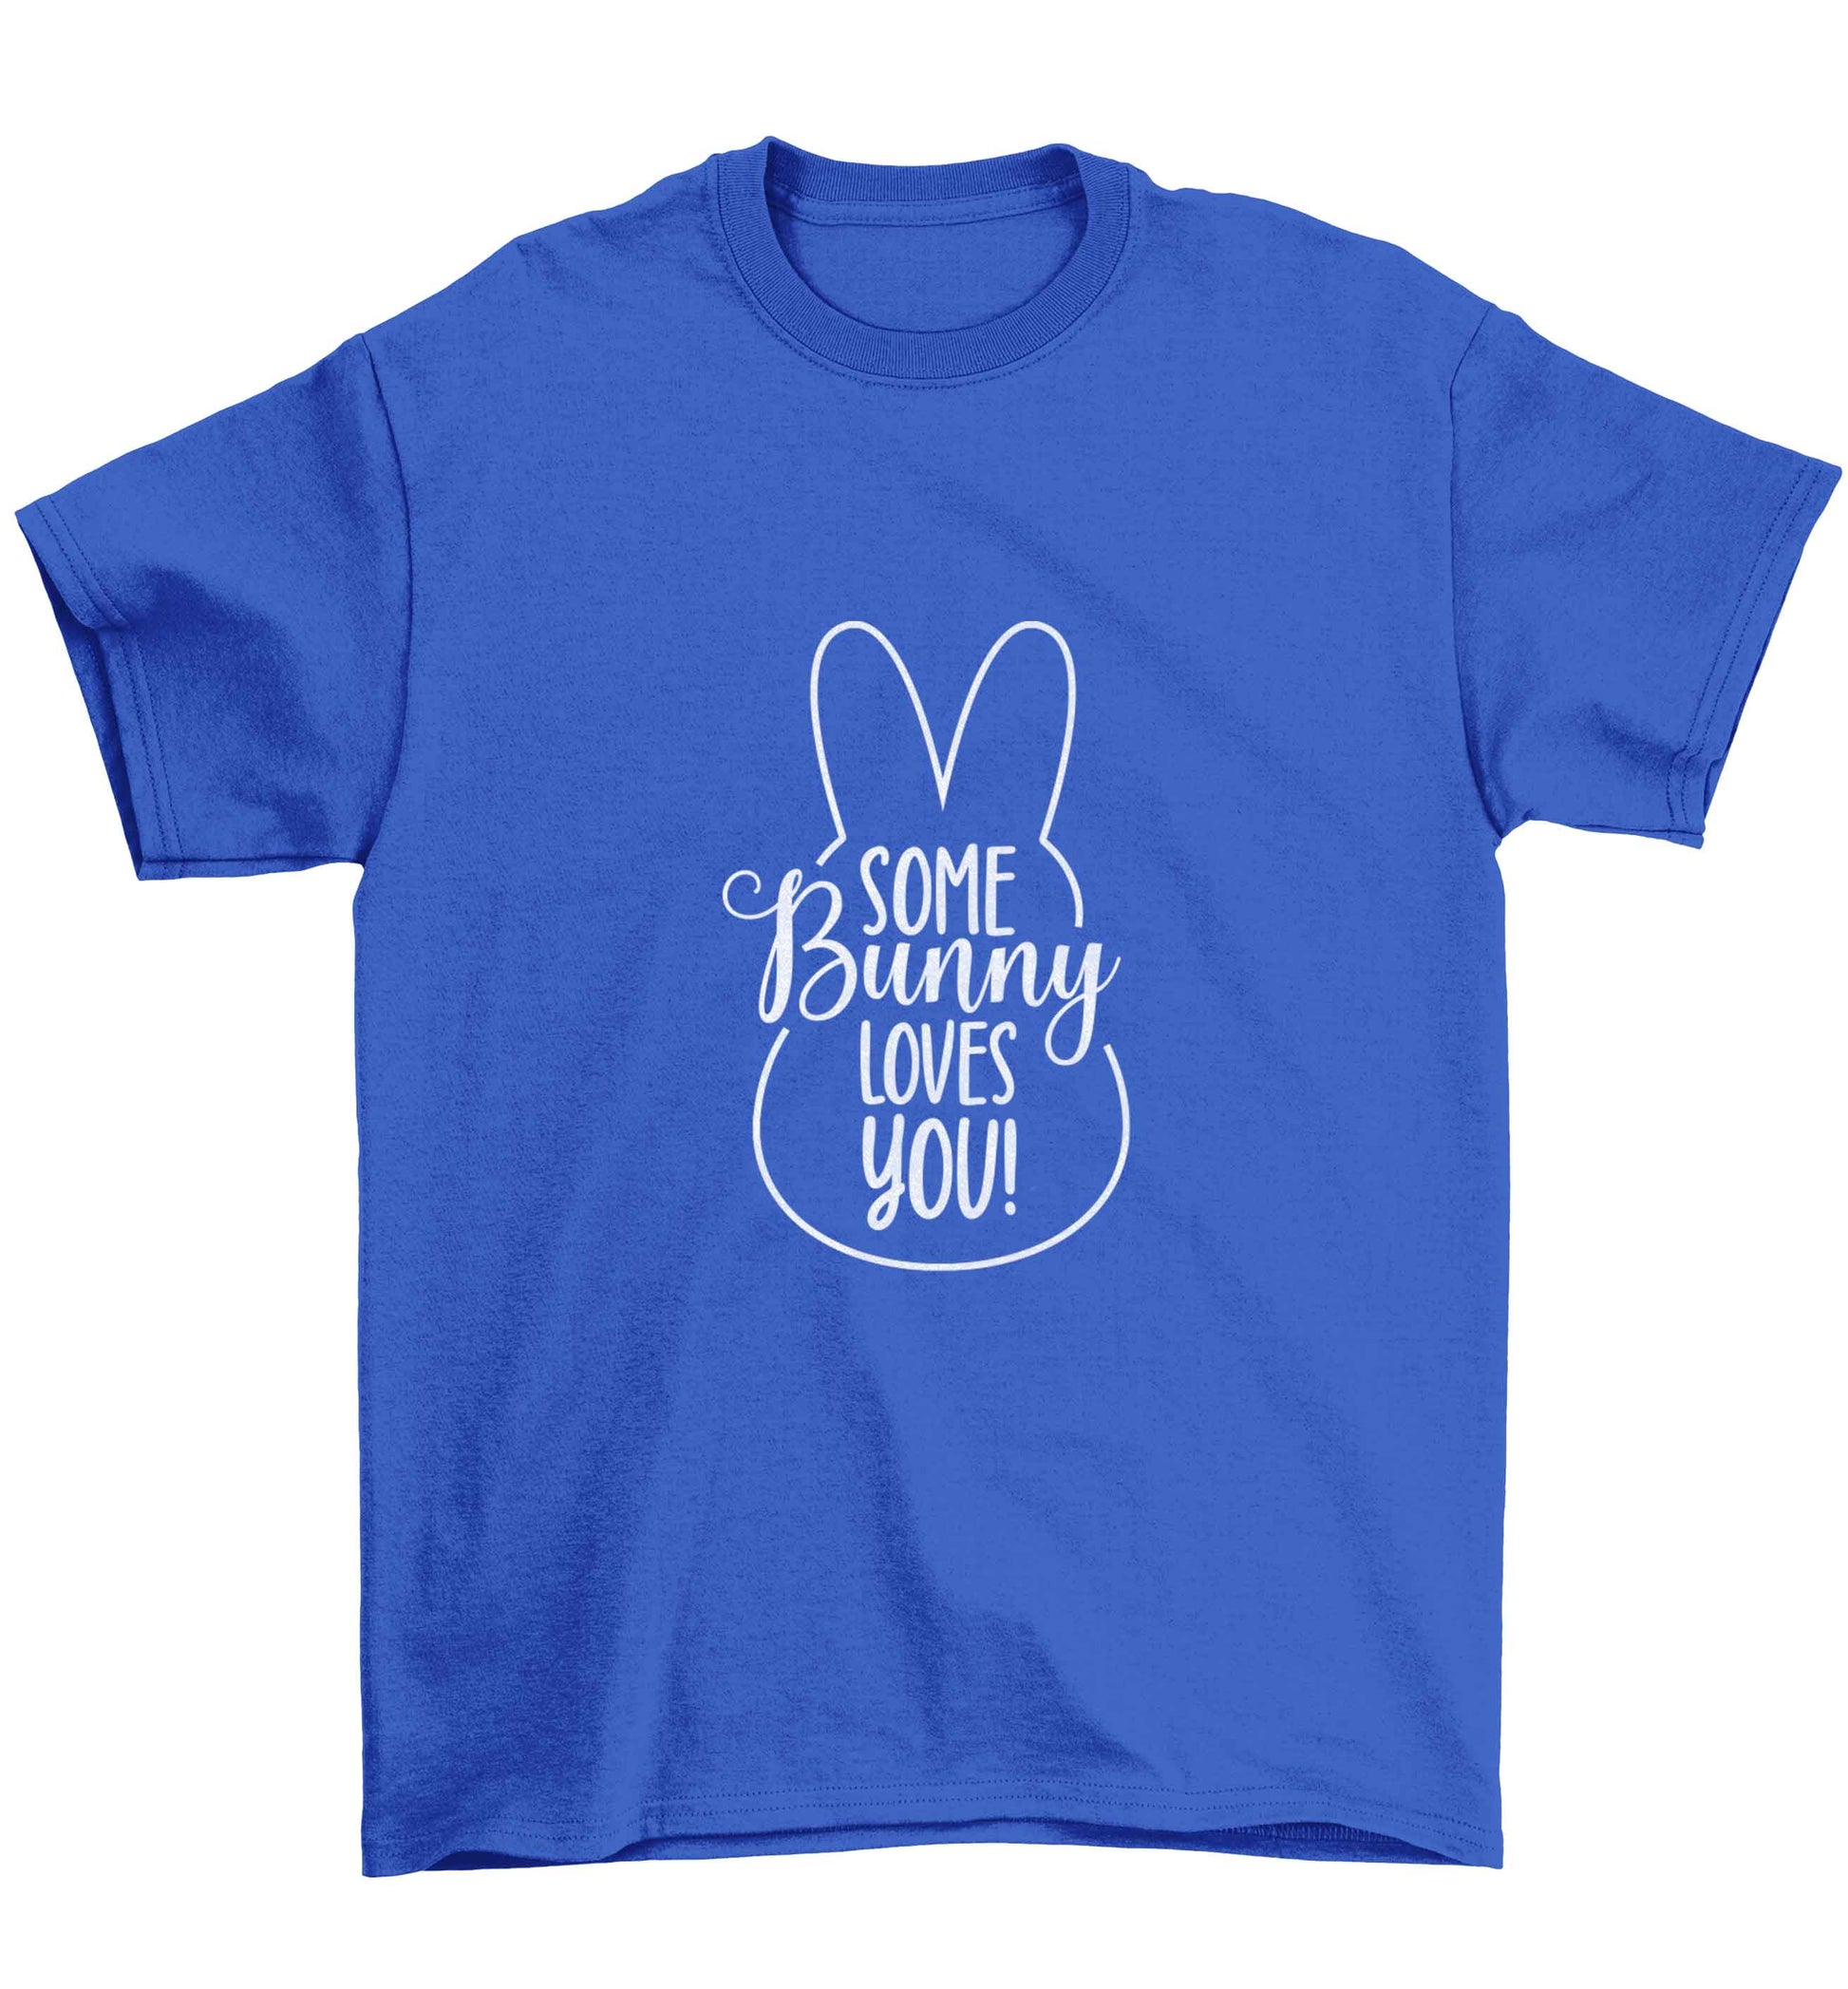 Some bunny loves you Children's blue Tshirt 12-13 Years